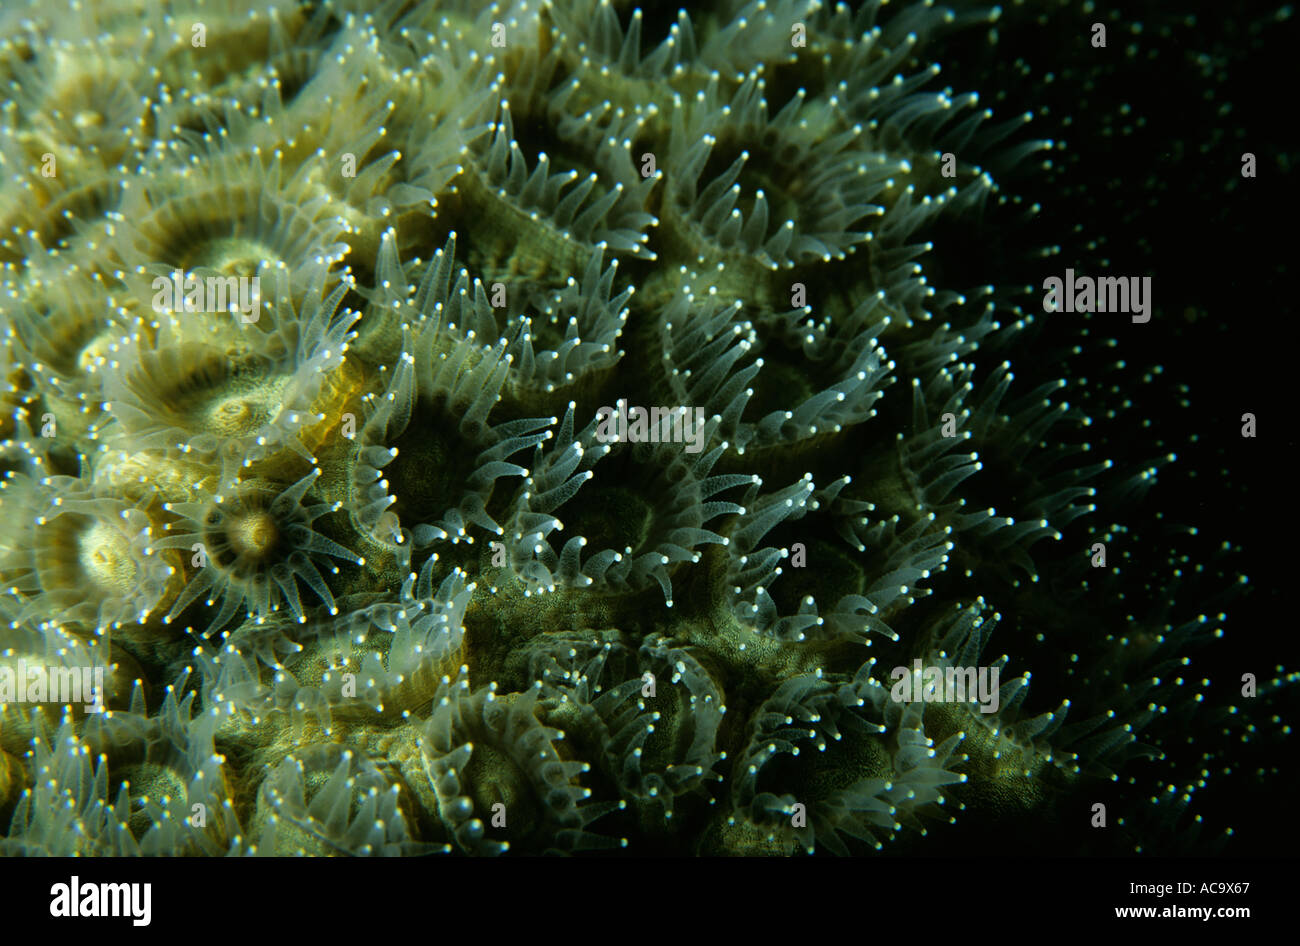 Egypt Red Sea Shab Darla Polyp Of A Mosaic Coral At Night Stock Photo